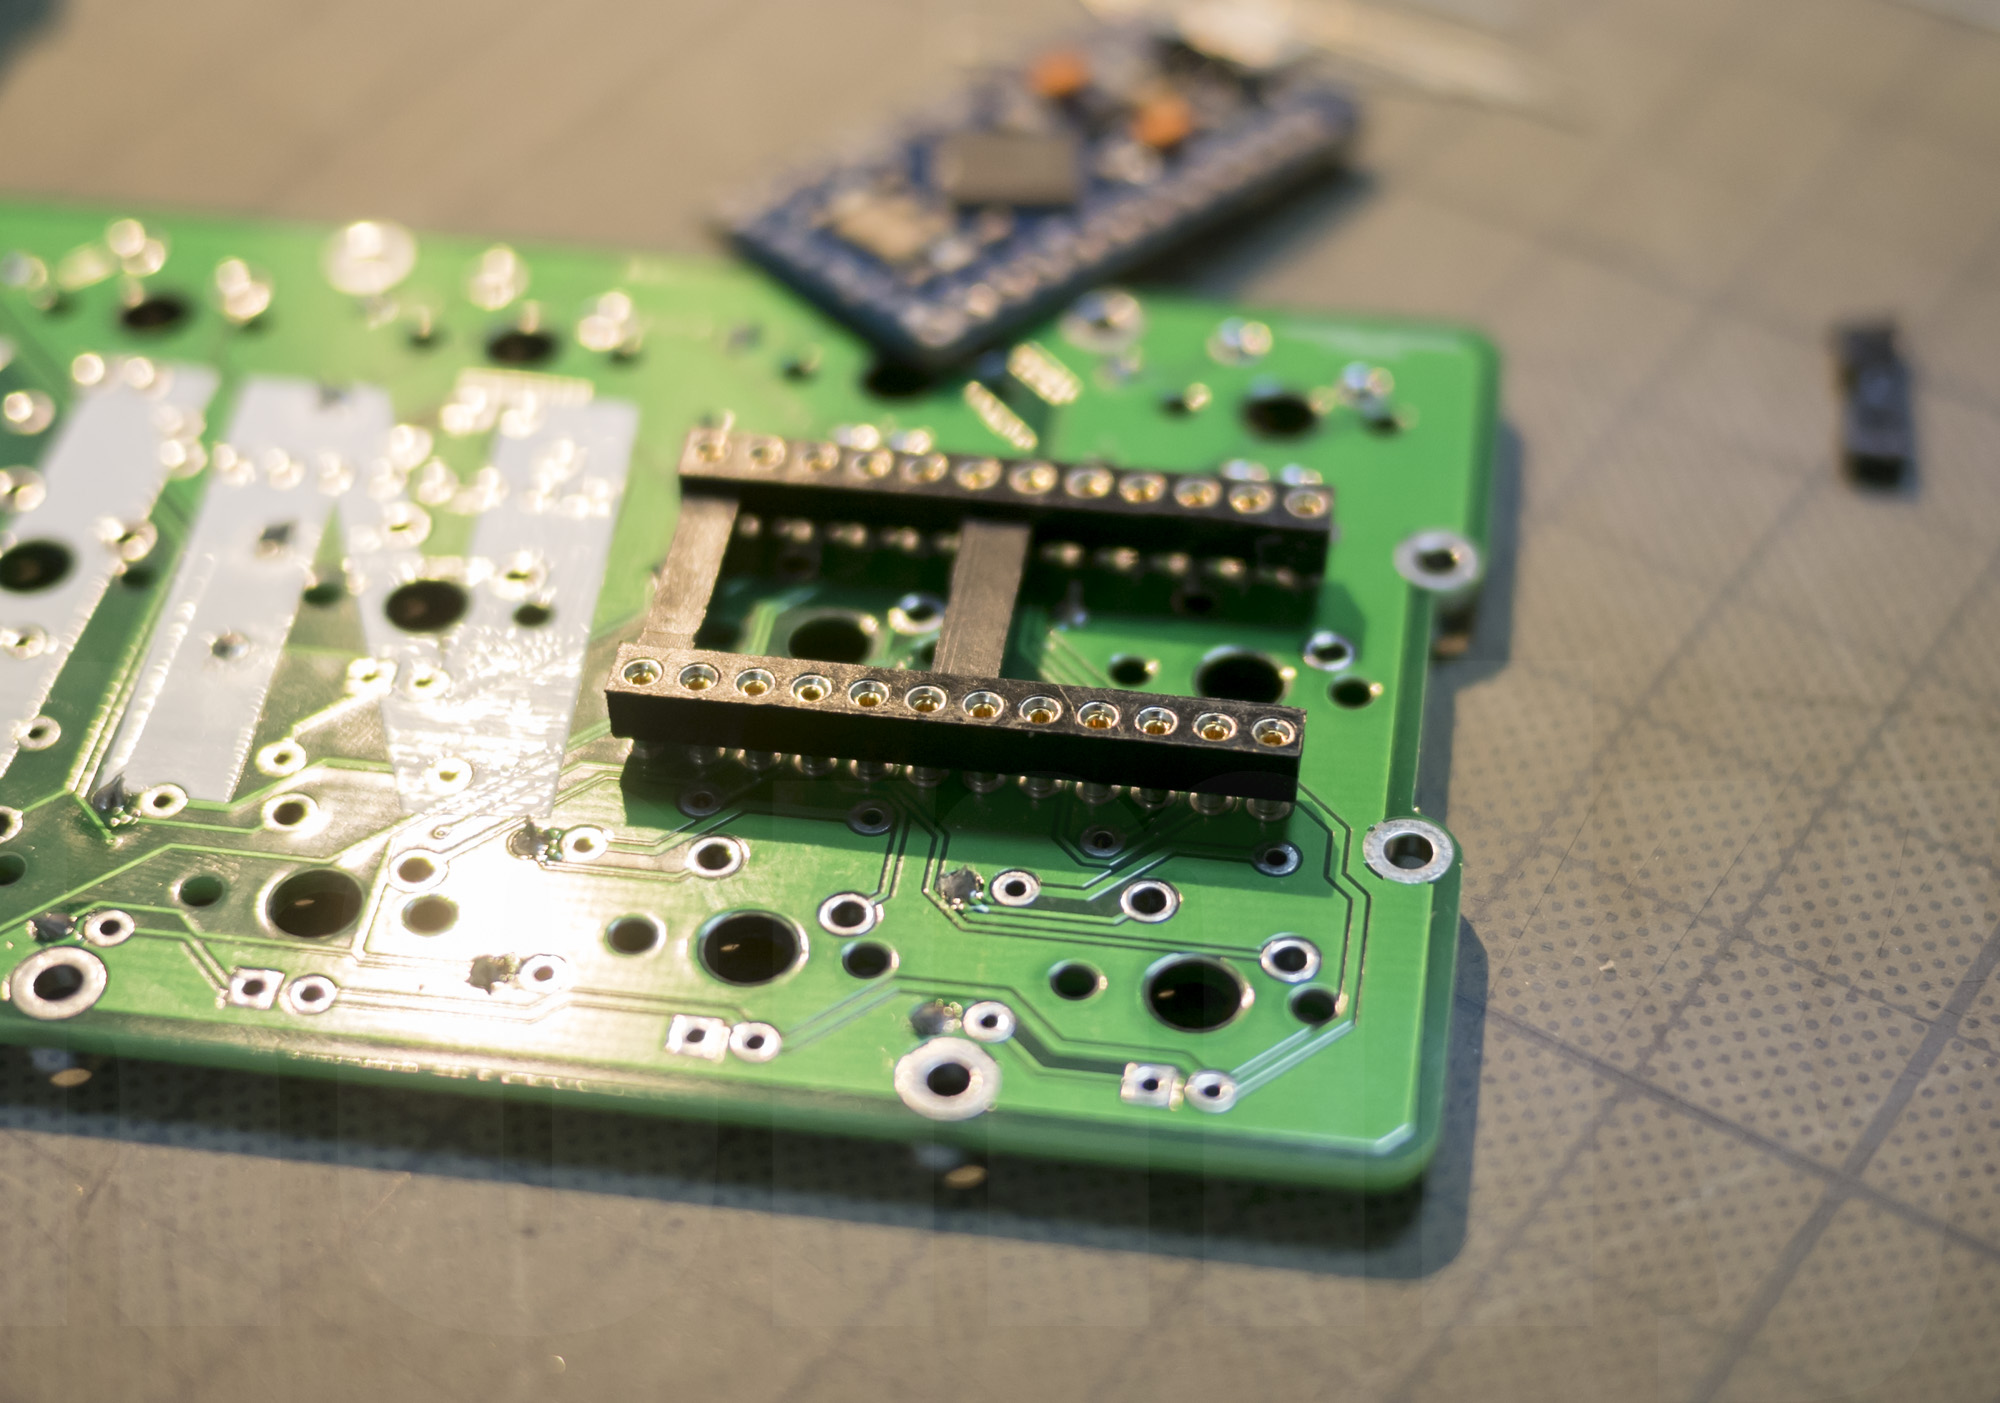 Soldering IC Socket to the Gherkin PCB